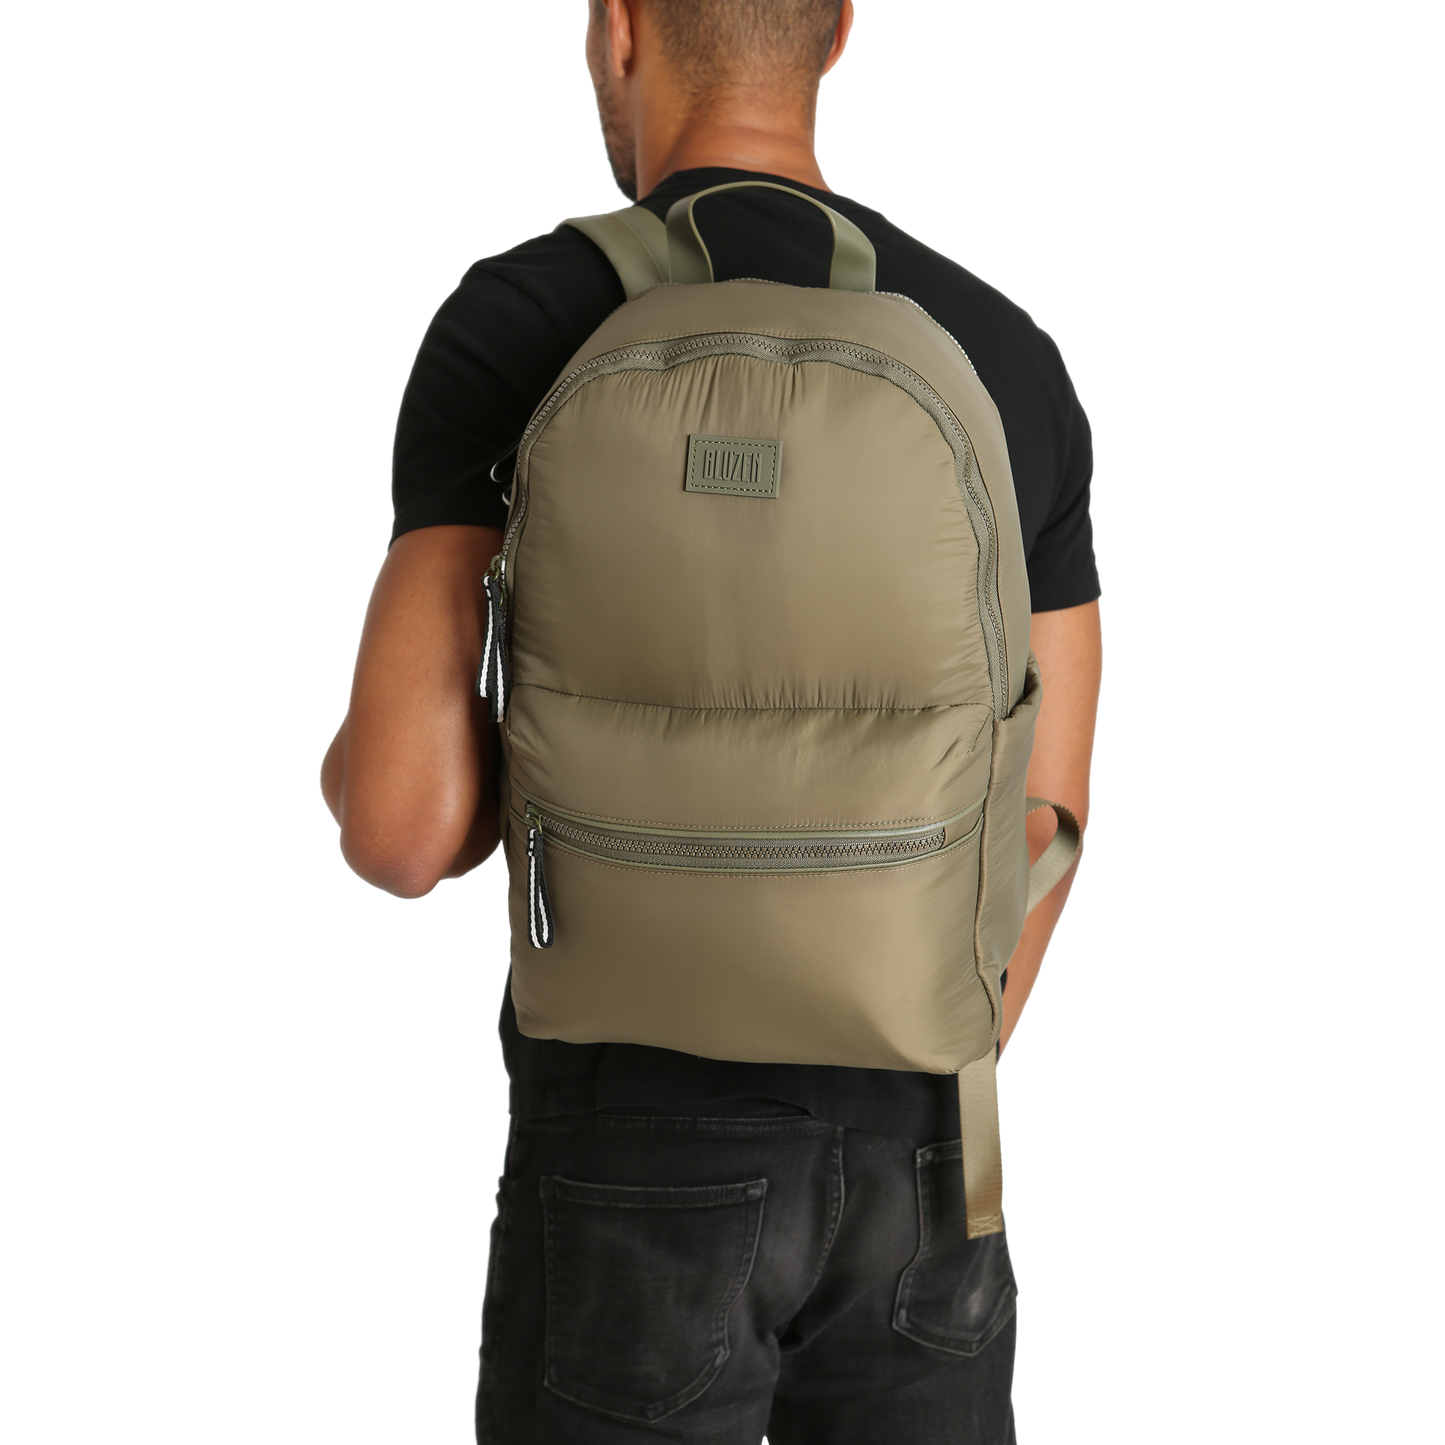 Parachute Nylon Backpack in olive